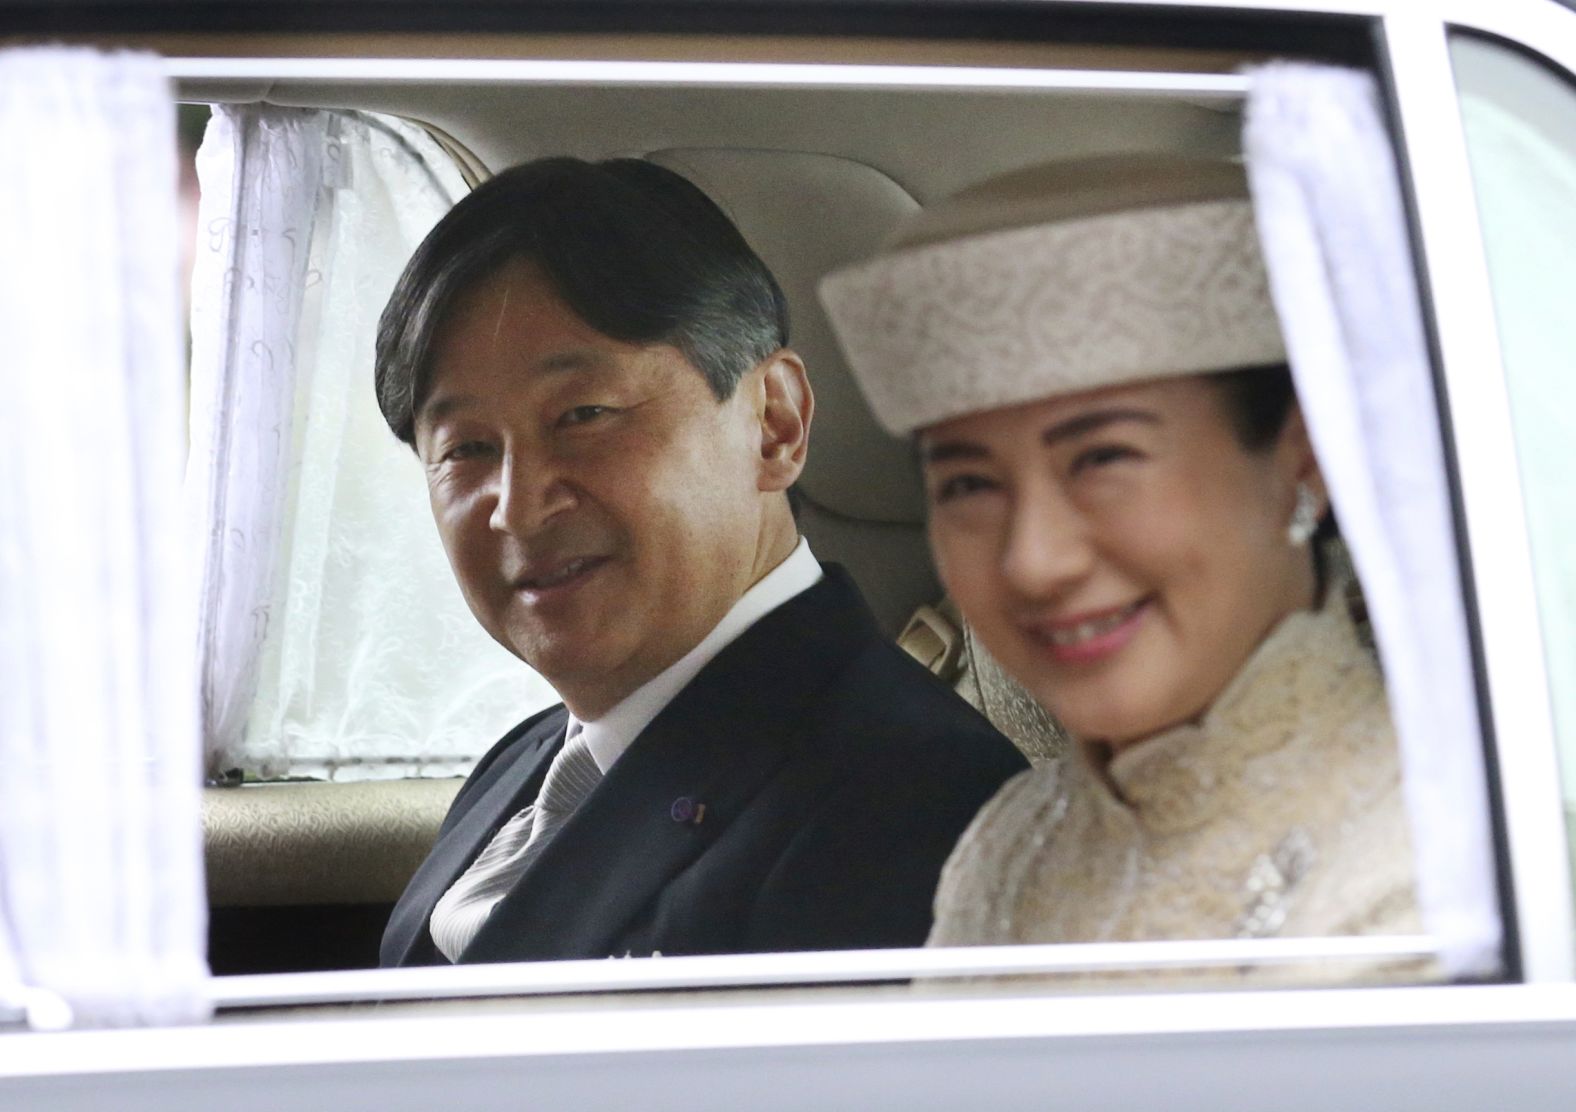 Crown Prince Naruhito, Akihito's oldest son and soon-to-be emperor, arrives at the Imperial Palace with his wife, Masako.